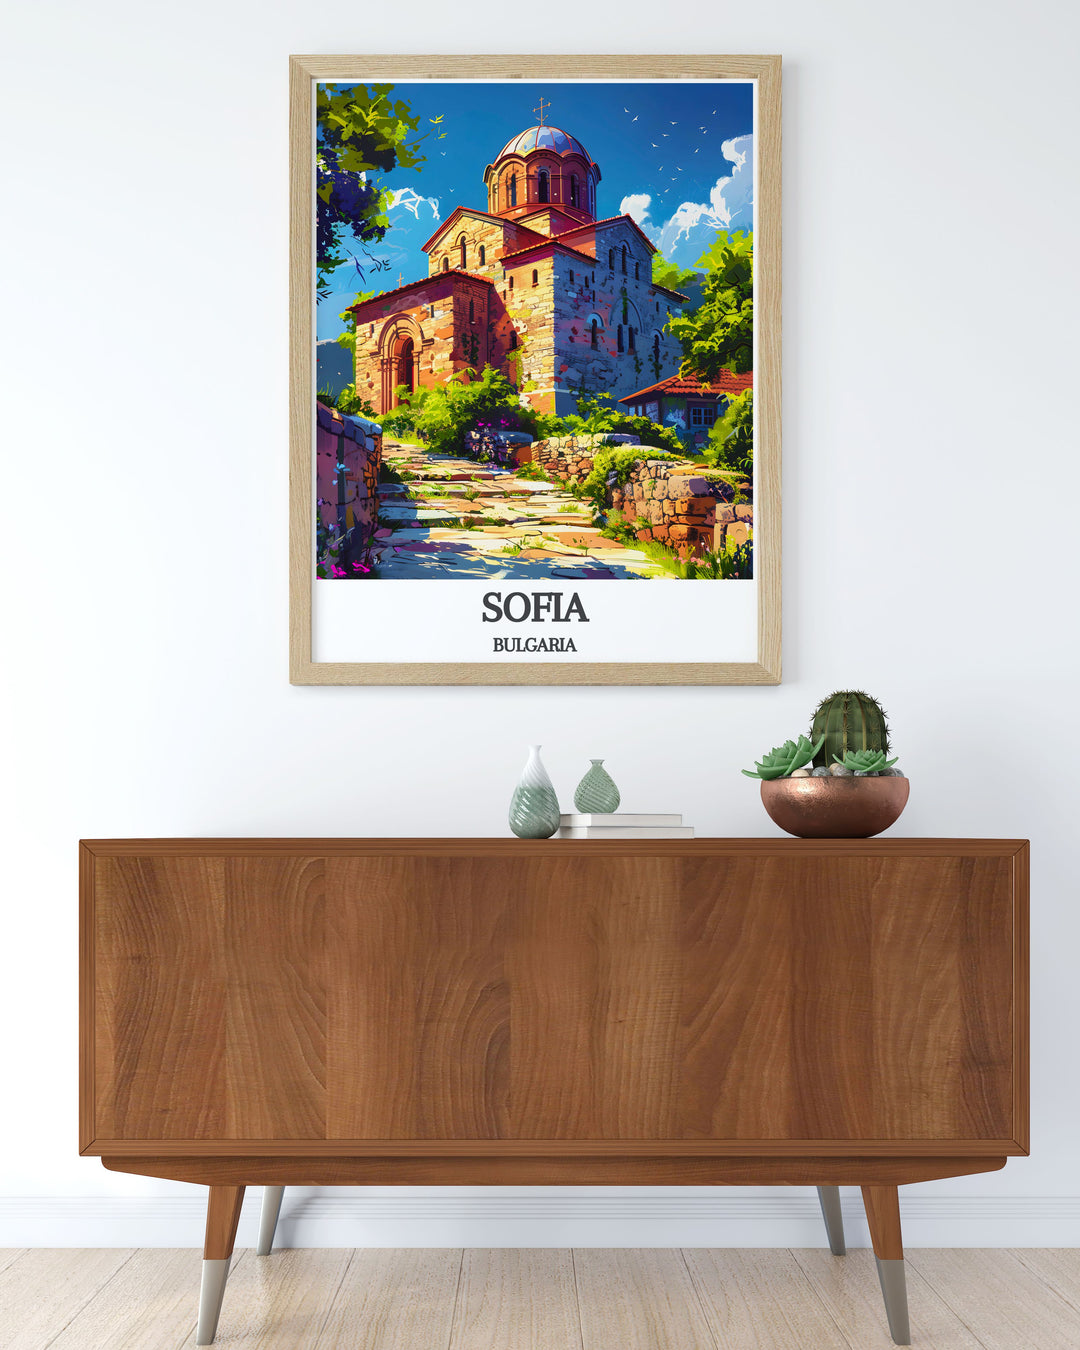 Stunning Sofia Art Print capturing the essence of BULGARIA Rila Monastery with vivid colors and meticulous details a must have for art lovers and travelers.